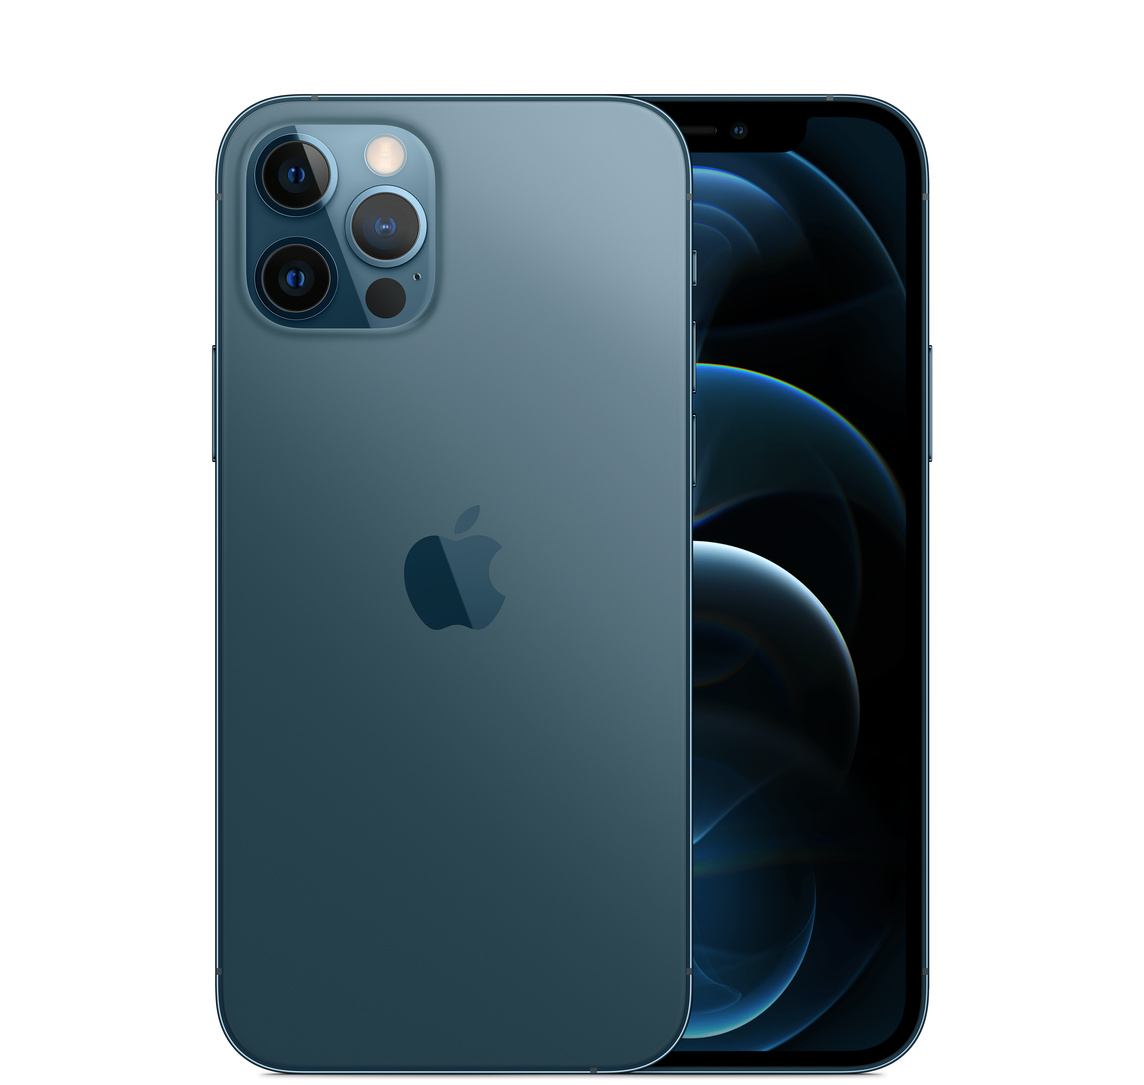 Back, blue iPhone 12, Pro camera system with True Tone flash. Front, all-screen display